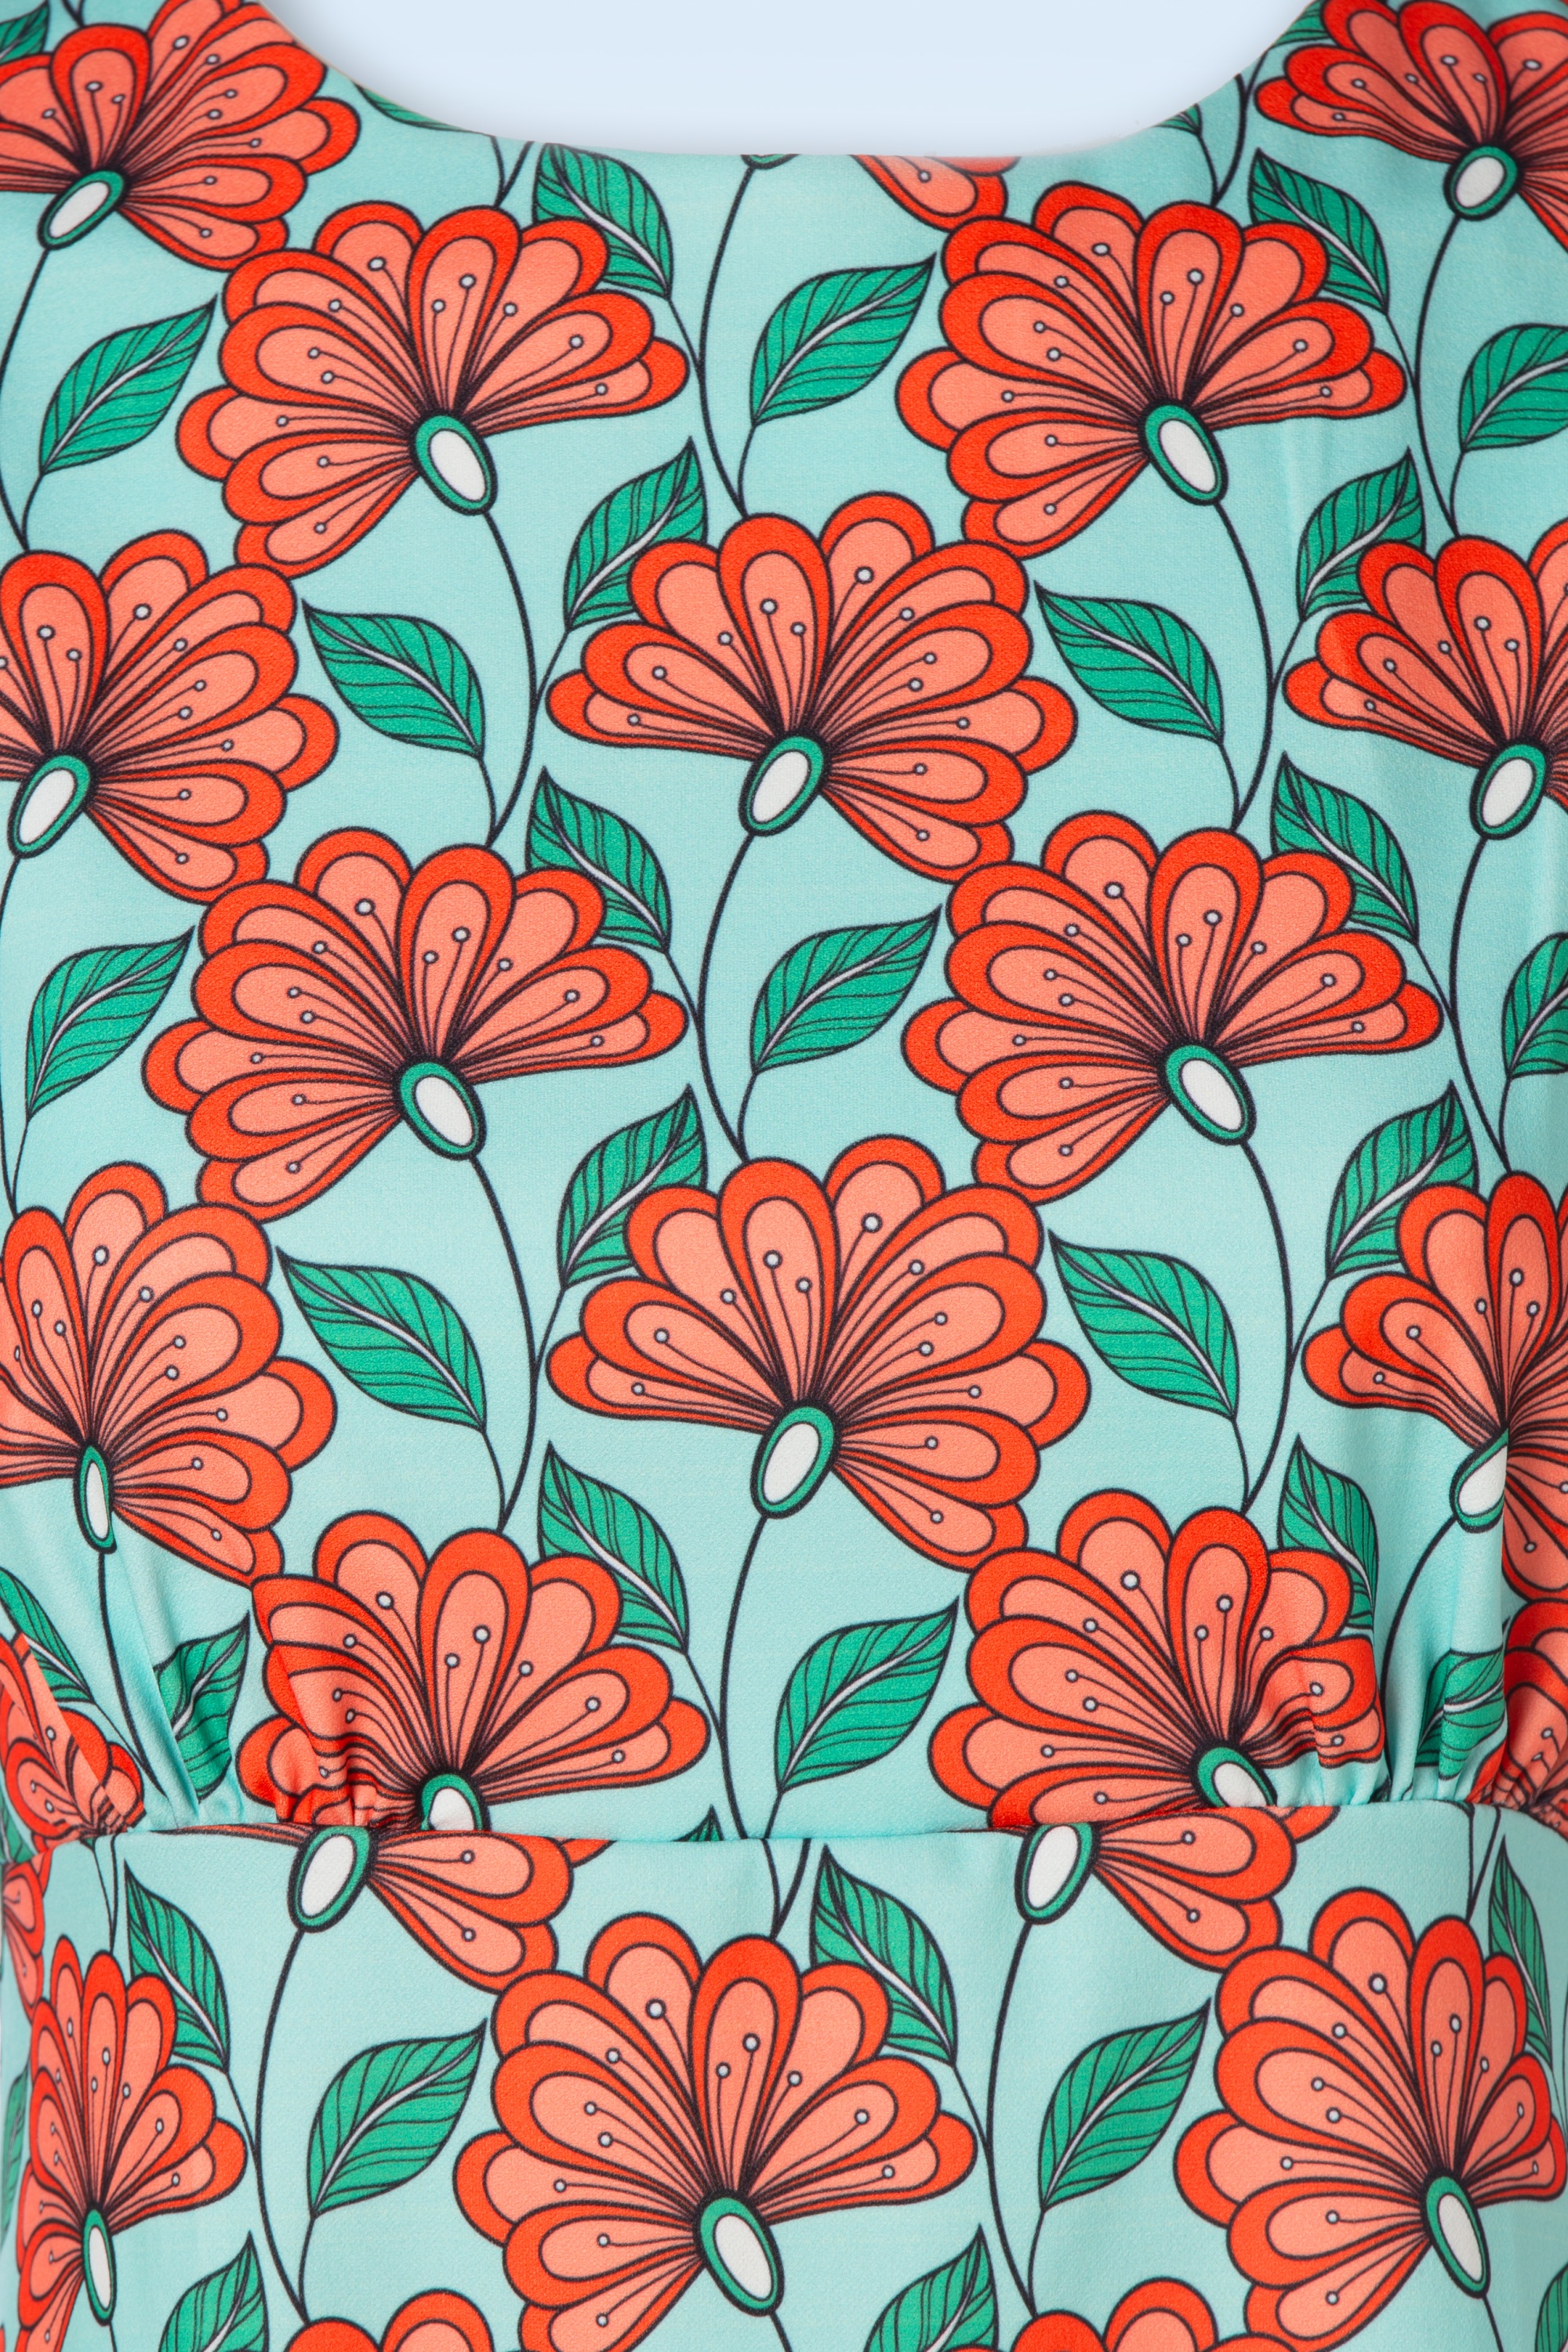 Vintage Chic for Topvintage - Betty floral jurk in turquoise en oranje 3